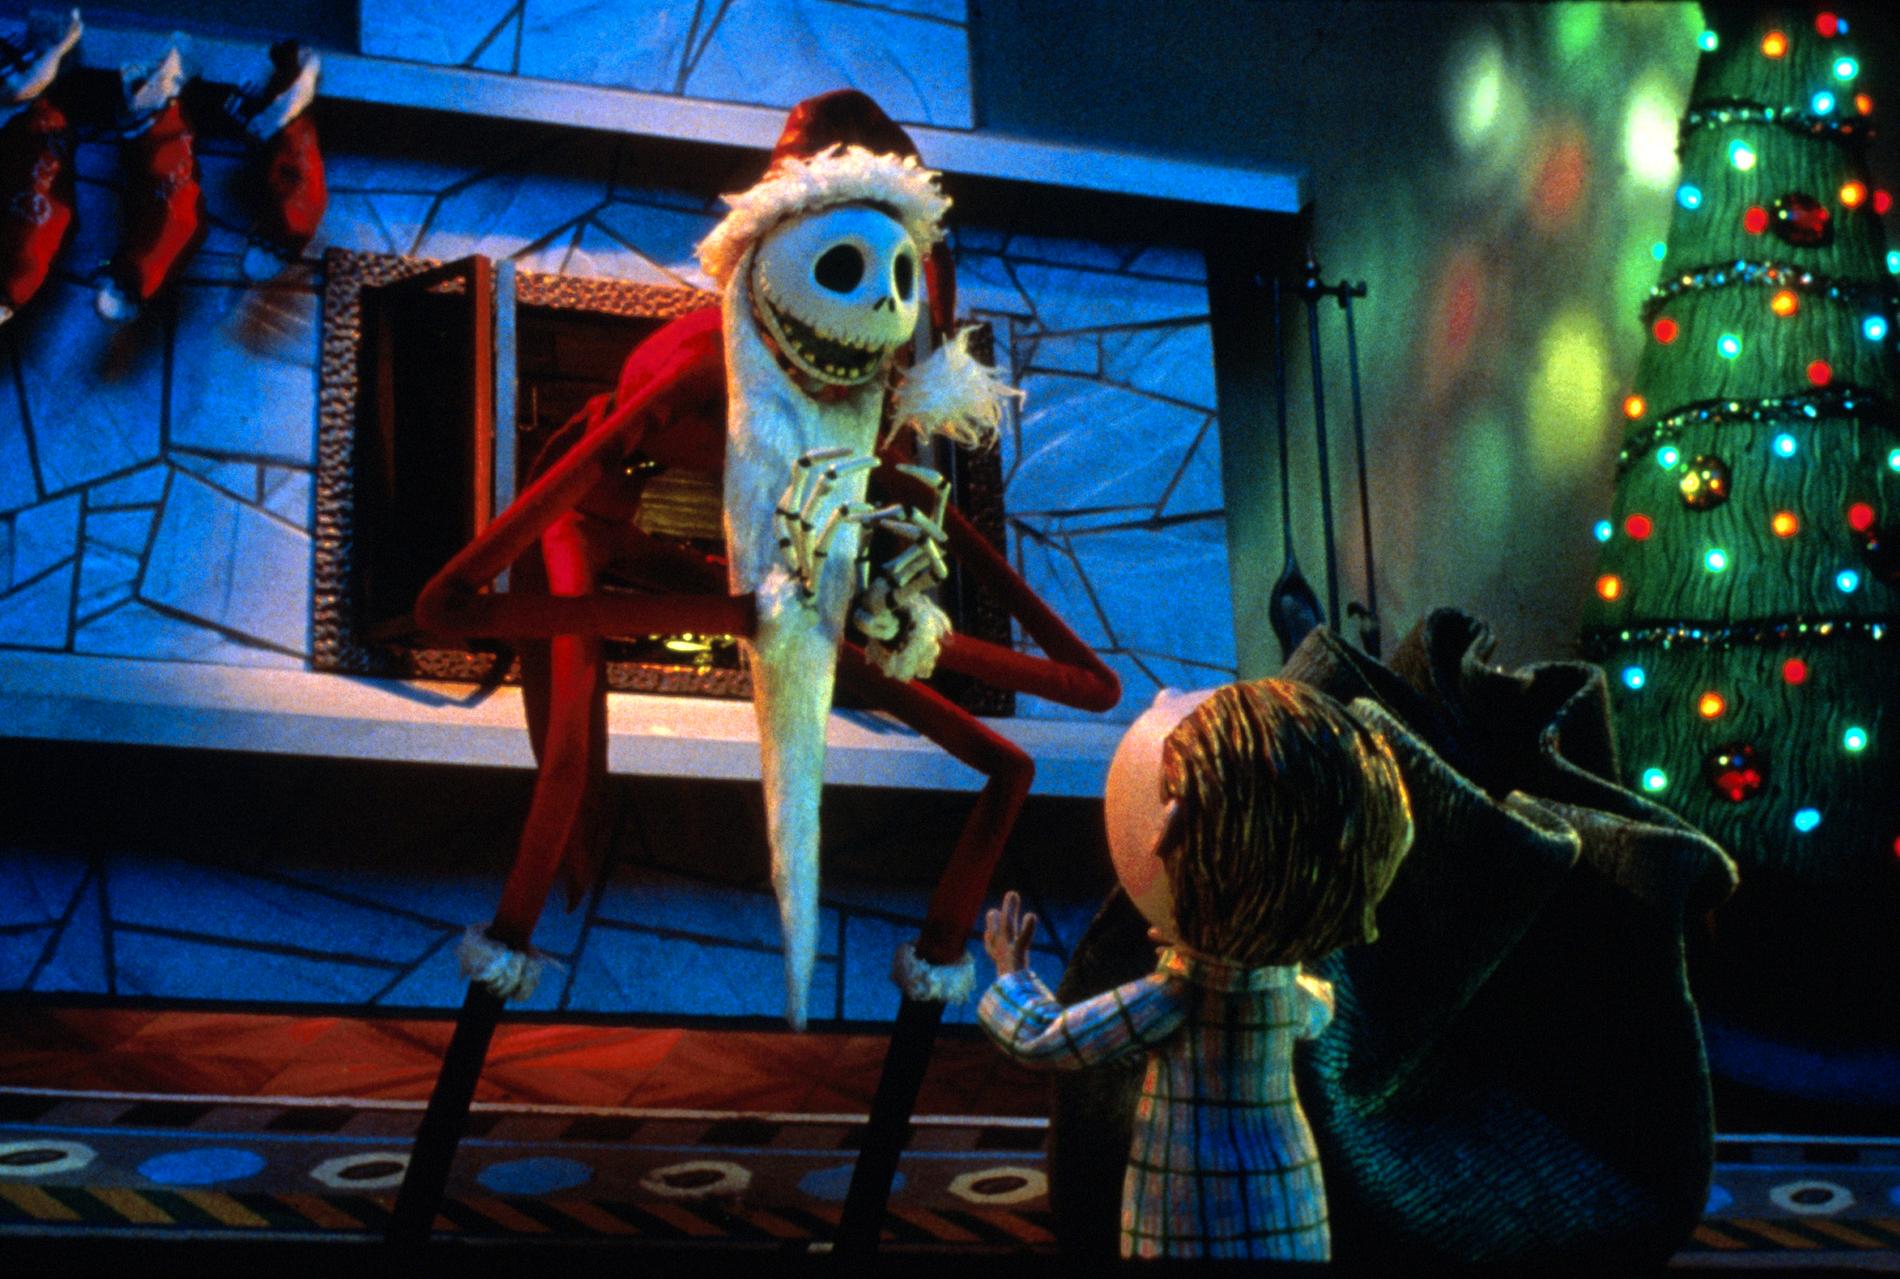 ”The nightmare before christmas”.